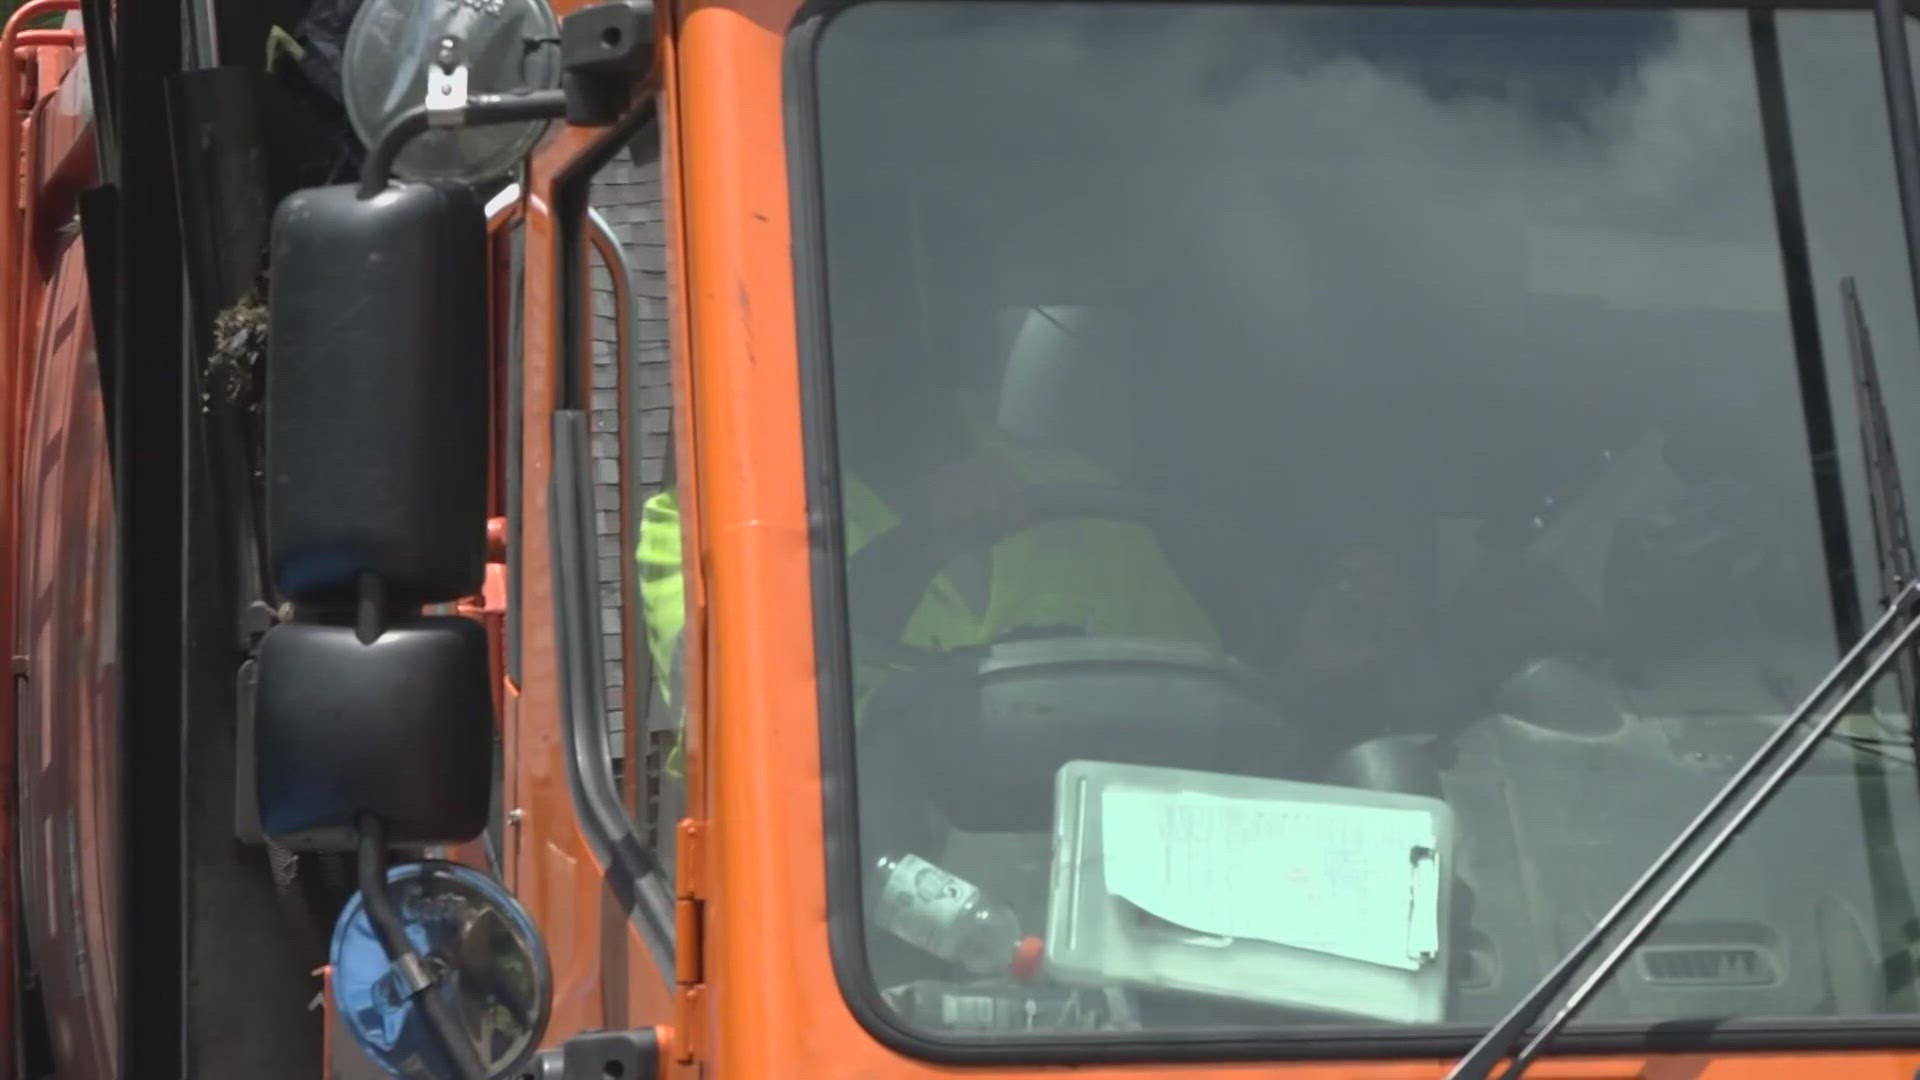 Garbage truck drivers are saying they're overworked, underpaid, and left to work in hot trucks with no AC.